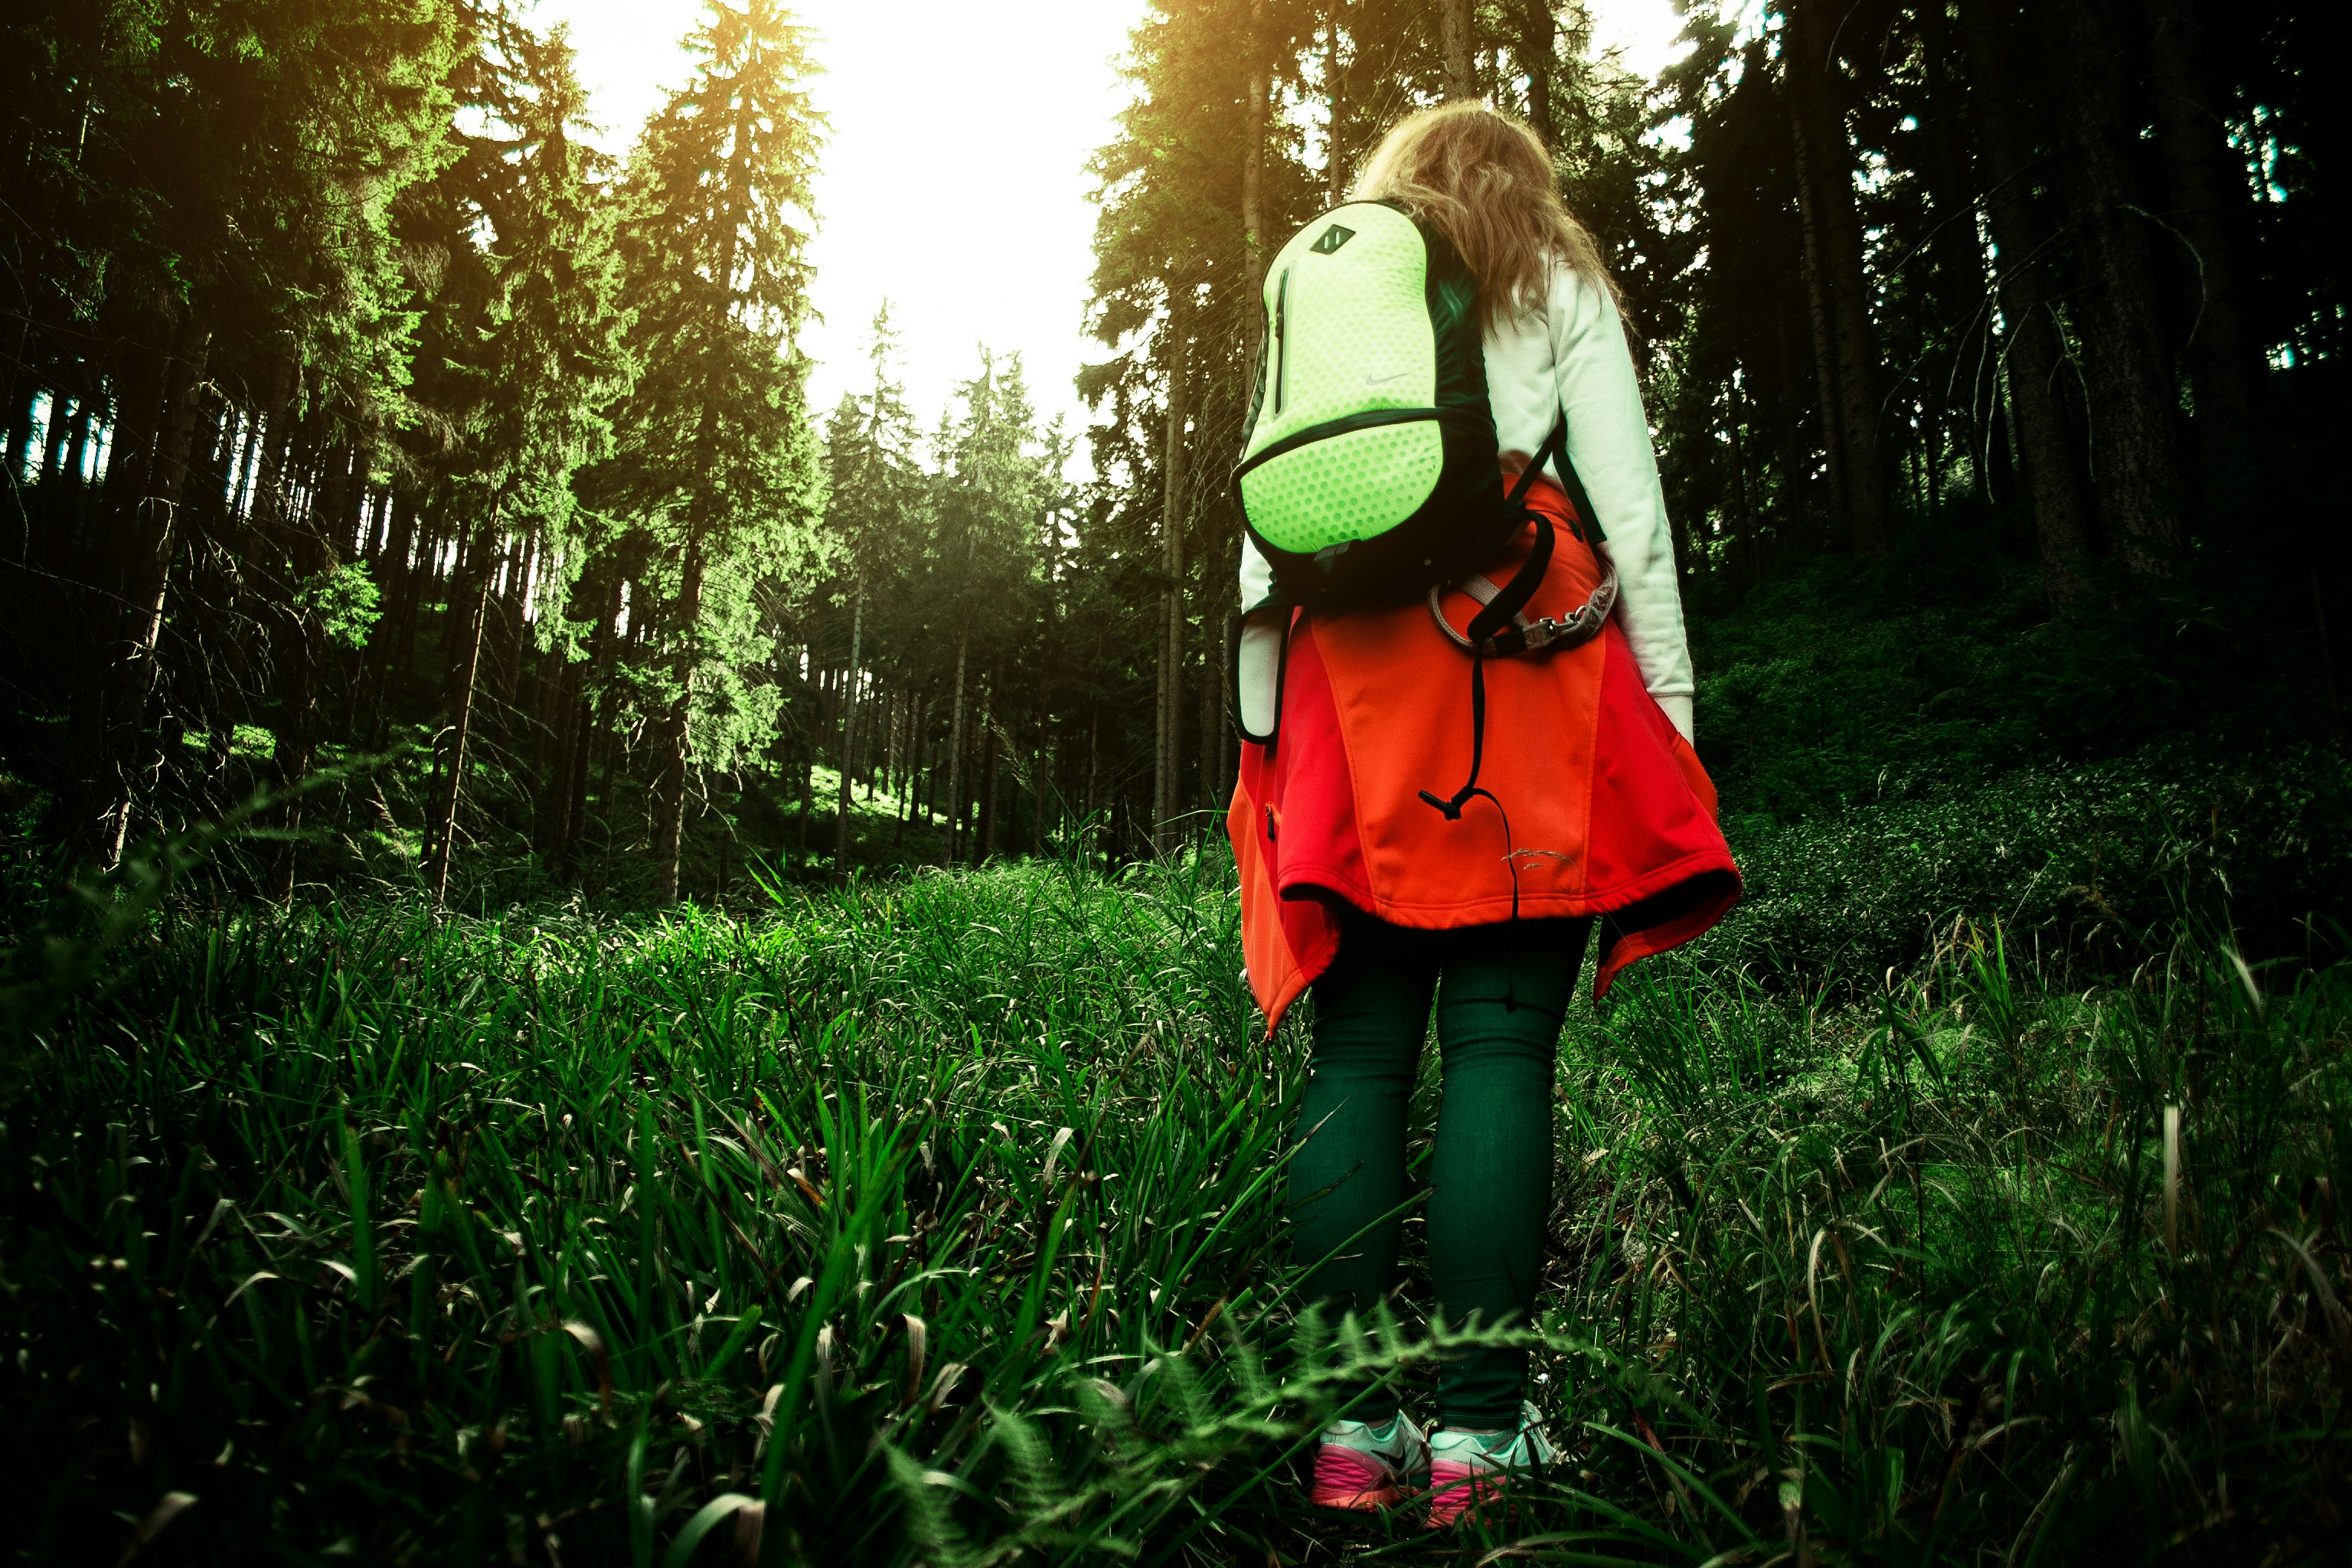 woman carrying green backpack walking in the grass filed